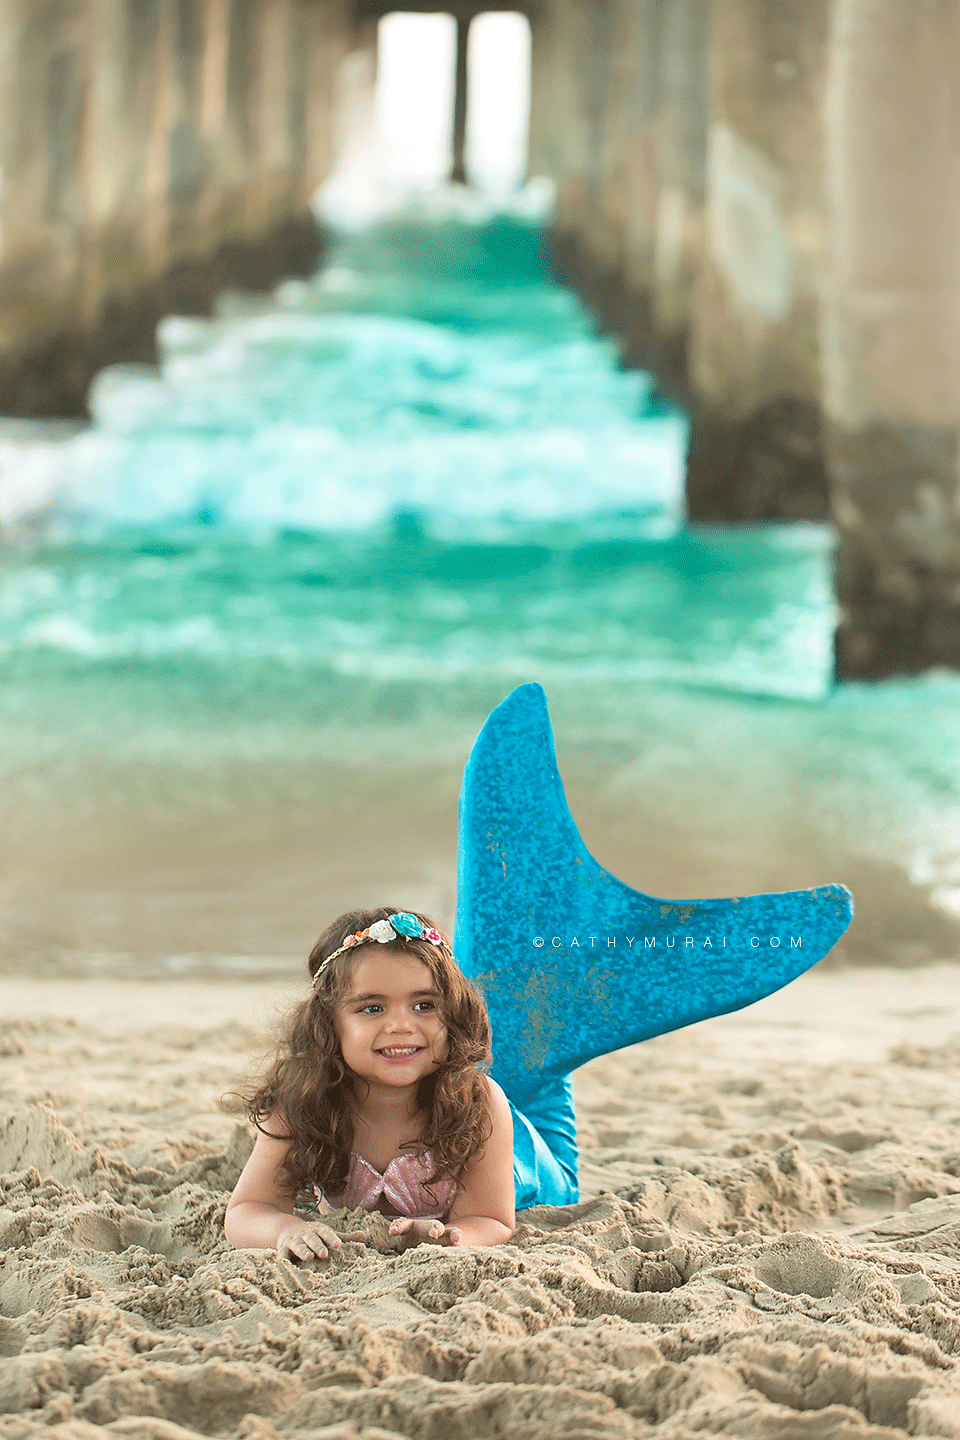 The Little Mermaid Themed Birthday Photography, The Little Mermaid Themed Birthday Photography, 3 year old birthday girl wearing little mermaid costume laying on the sand on the beach for her birthday photo session, Disney inspired, the little mermaid, beach session, Manhattan Beach, Disney’s little mermaid, Mermaid Photography Prop, toddler mermaid photography, disney inspired photography, little mermaid inspired birthday photography, little mermaid inspired birthday photos, little mermaid inspired birthday pictures, little mermaid inspired birthday portraits, mermaid tail, Every little girl dreams of being a Mermaid, little mermaid beach session, turquoise mermaid tail, LOS ANGELES Birthday Portraits, LOS ANGELES Birthday pictures, LOS ANGELES Birthday Photographer, LOS ANGELES Birthday Photography, LOS ANGELES Toddler Photographer, LOS ANGELES Toddler Photography, LOS ANGELES Child Photography, LA Birthday Portraits, LA Birthday pictures, LA Birthday Photographer, LA Birthday Photography, LA Toddler Photographer, LA Toddler Photography, LA Child Photography, SAN GABRIEL Birthday Portraits, SAN GABRIEL Birthday pictures, SAN GABRIEL Birthday Photographer, SAN GABRIEL Birthday Photography, SAN GABRIEL Toddler Photographer, SAN GABRIEL Toddler Photography, ALHAMBRA Birthday Portraits, ALHAMBRA Birthday pictures, ALHAMBRA Birthday Photographer, ALHAMBRA Birthday Photography, ALHAMBRA Toddler Photographer, ALHAMBRA Toddler Photography, SAN MARINO Birthday Portraits, SAN MARINO Birthday pictures, SAN MARINO Birthday Photographer, SAN MARINO Birthday Photography, SAN MARINO Toddler Photographer, SAN MARINO Toddler Photography, SOUTH PASADENA Birthday Portraits, SOUTH PASADENA Birthday pictures, SOUTH PASADENA Birthday Photographer, SOUTH PASADENA Birthday Photography, SOUTH PASADENA Toddler Photographer, SOUTH PASADENA Toddler Photography, PASADENA Birthday Portraits, PASADENA Birthday pictures, PASADENA Birthday Photographer, PASADENA Birthday Photography, PASADENA Toddler Photographer, PASADENA Toddler Photography, DOWNTOWN LA Birthday Portraits, DOWNTOWN LA Birthday pictures, DOWNTOWN LA Birthday Photographer, DOWNTOWN LA Birthday Photography, DOWNTOWN LA Toddler Photographer, DOWNTOWN LA Toddler Photography, GLENDALE Birthday Portraits, GLENDALE Birthday pictures, GLENDALE Birthday Photographer, GLENDALE Birthday Photography, GLENDALE Toddler Photographer, GLENDALE Toddler Photography, Birthday portraits, birthday pictures, birthday photographer, birthday photography, toddler photographer, toddler photography,